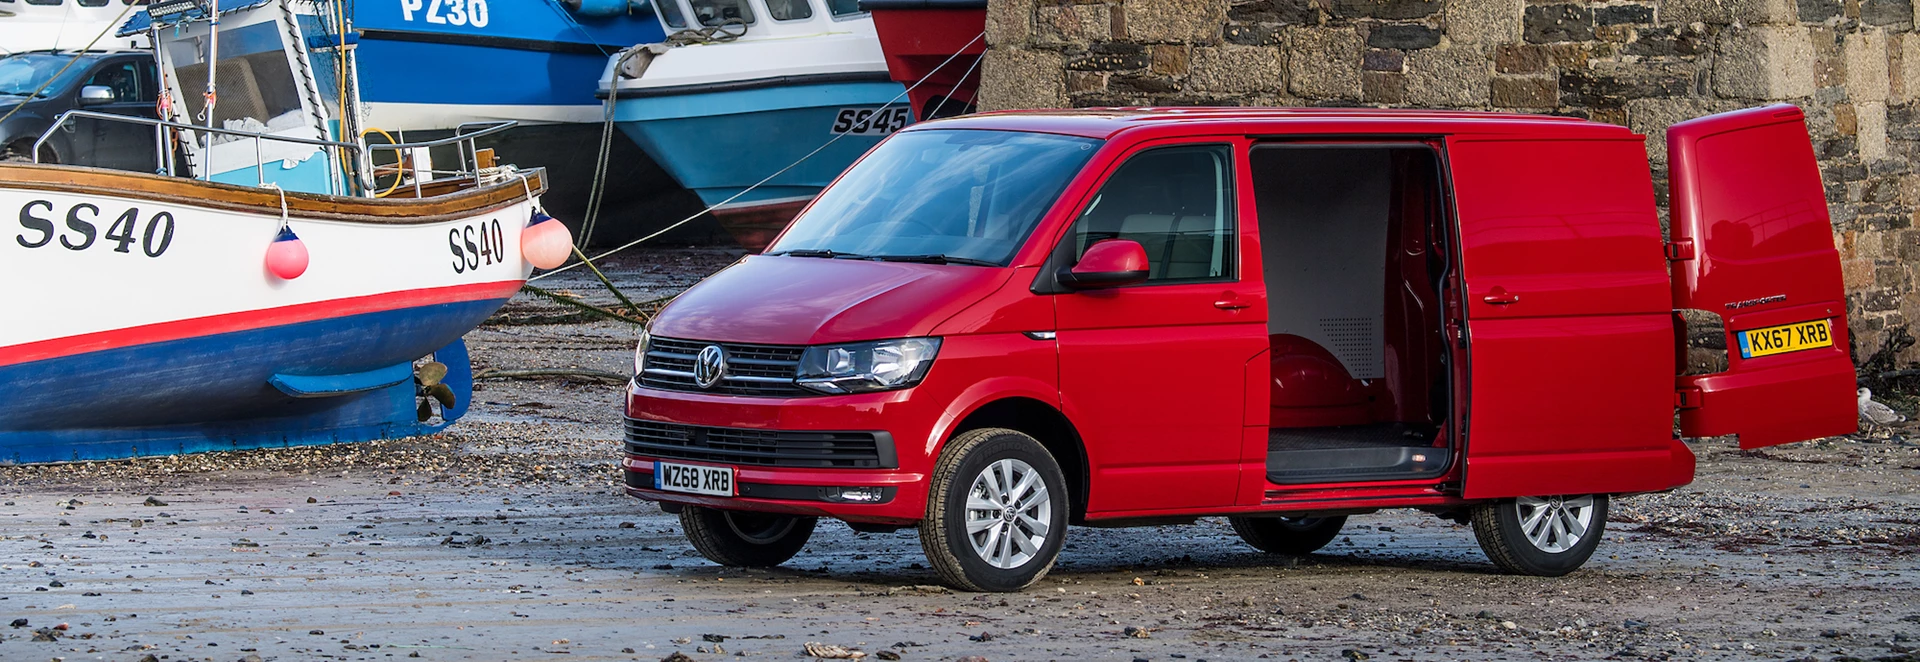 Guide to the Volkswagen Commercial Vehicle line-up